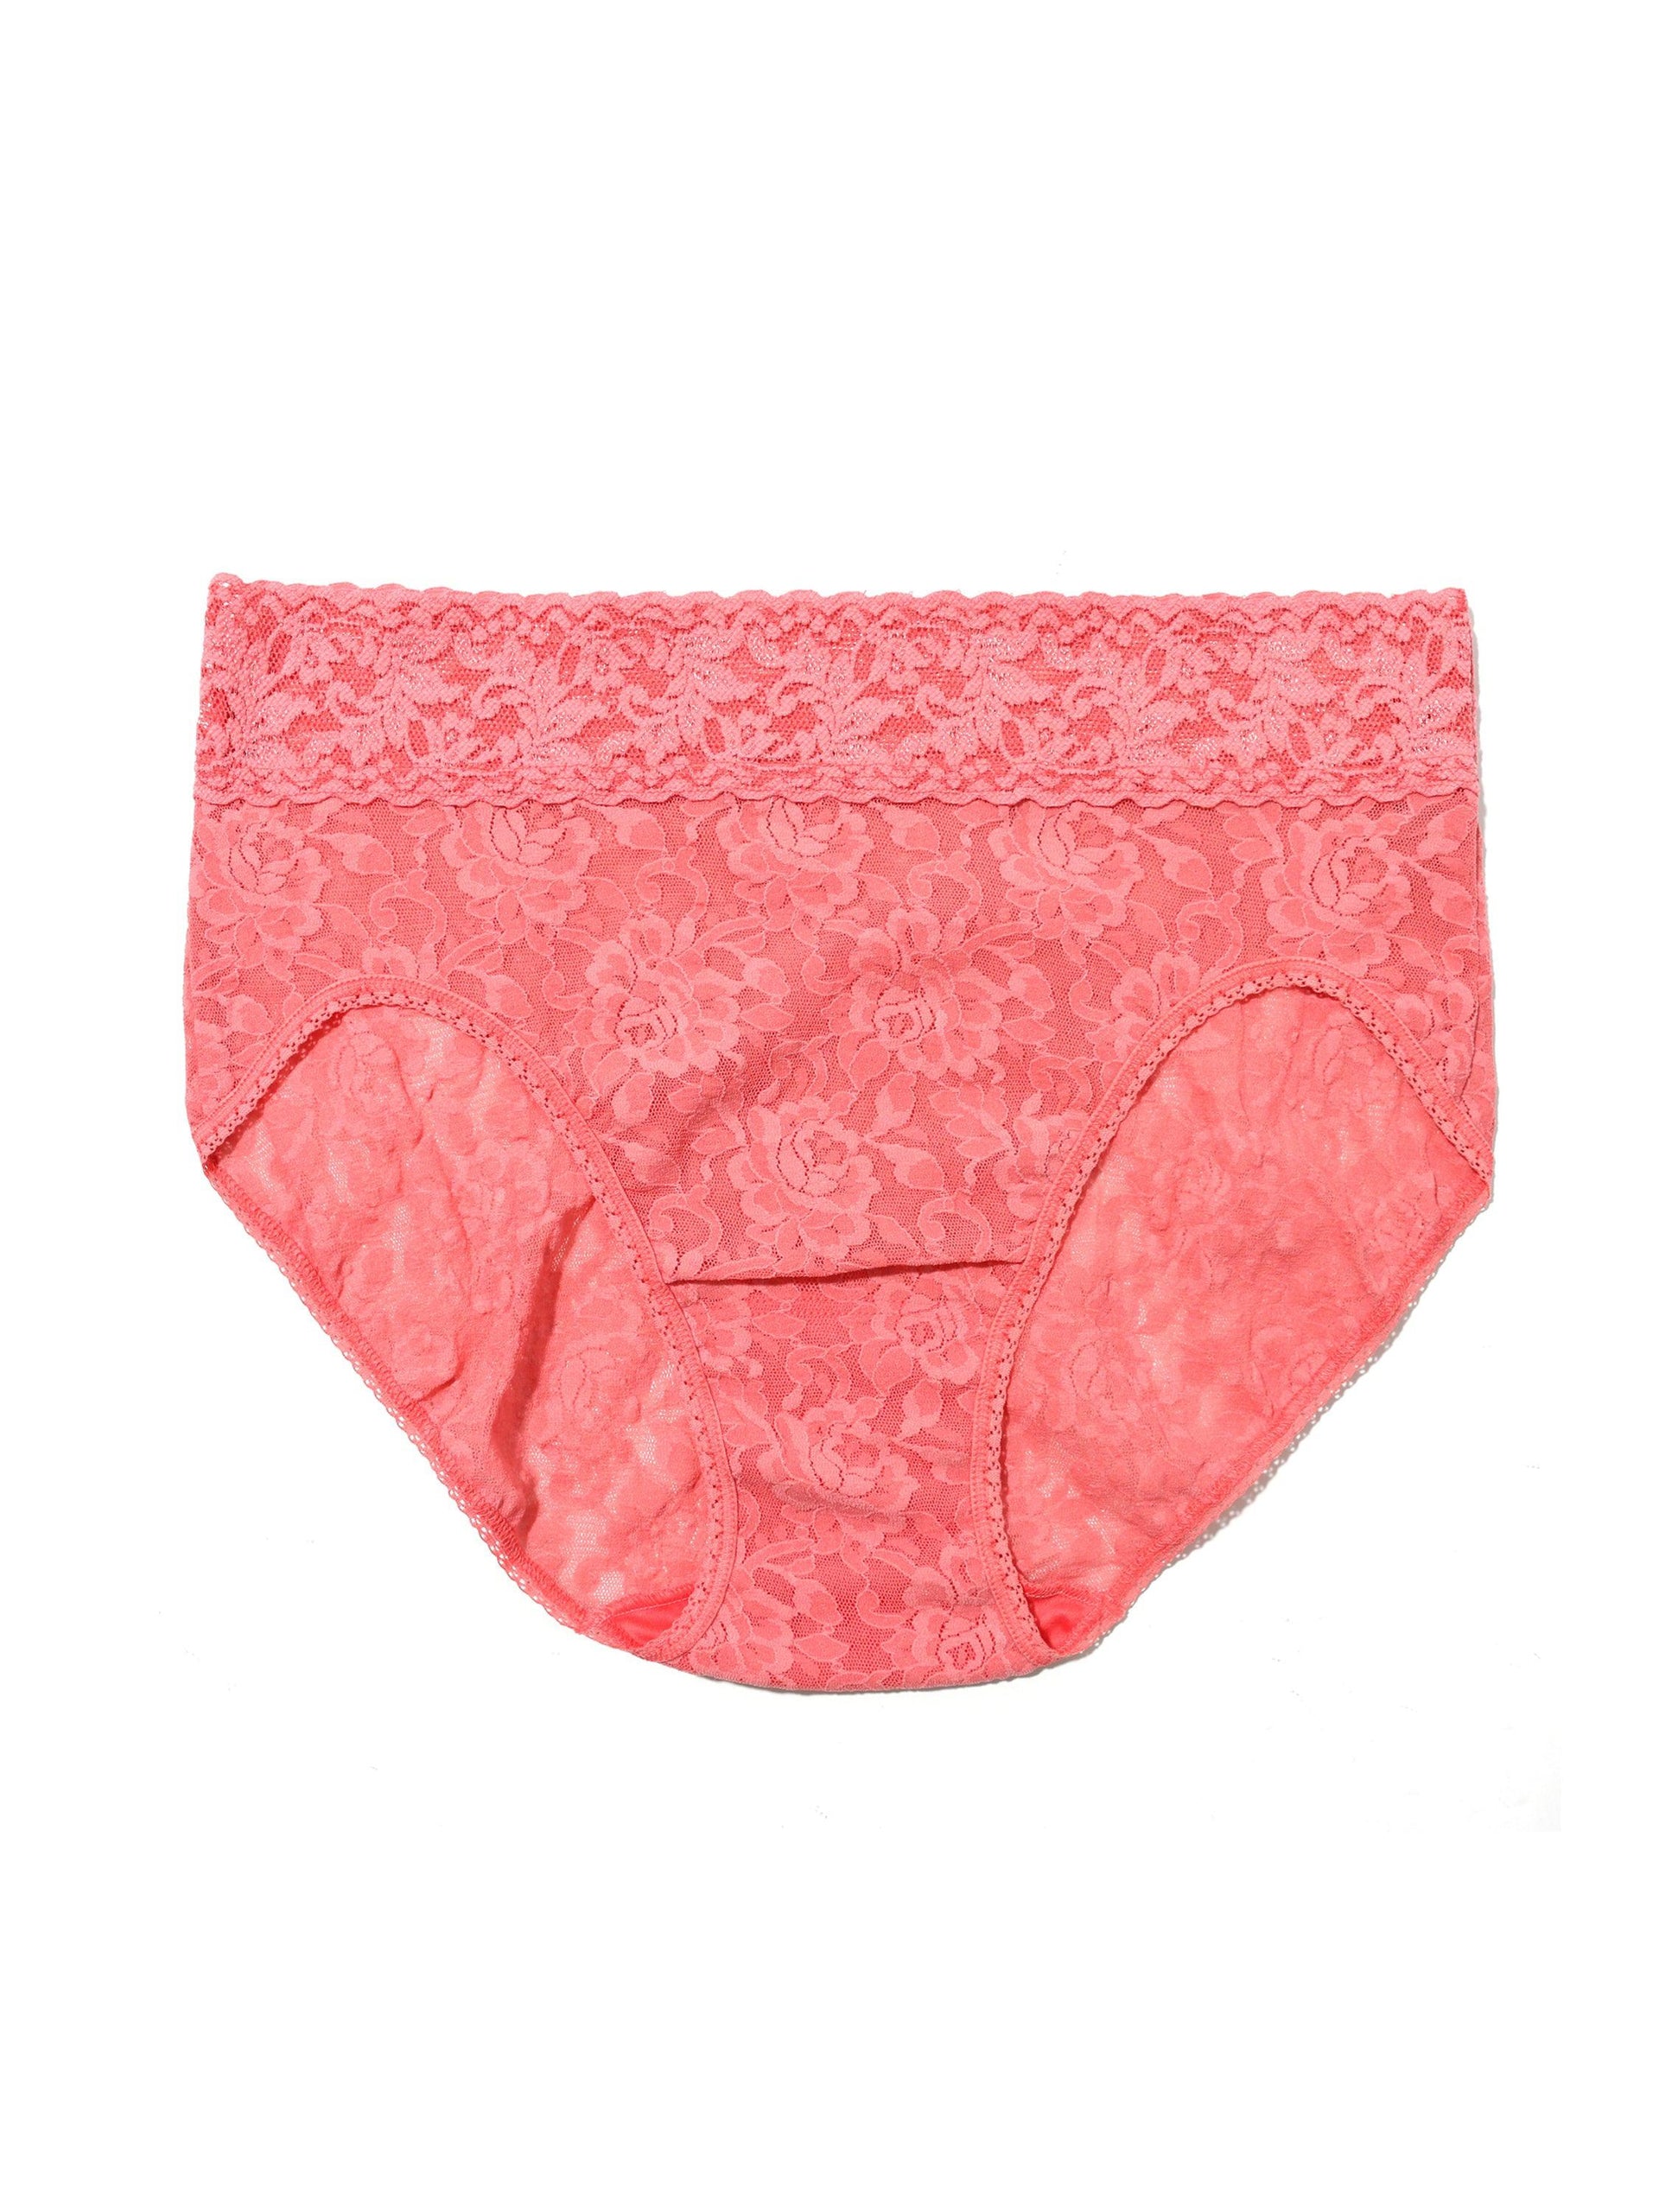 Signature Lace French Brief Guava Pink Sale | Hanky Panky